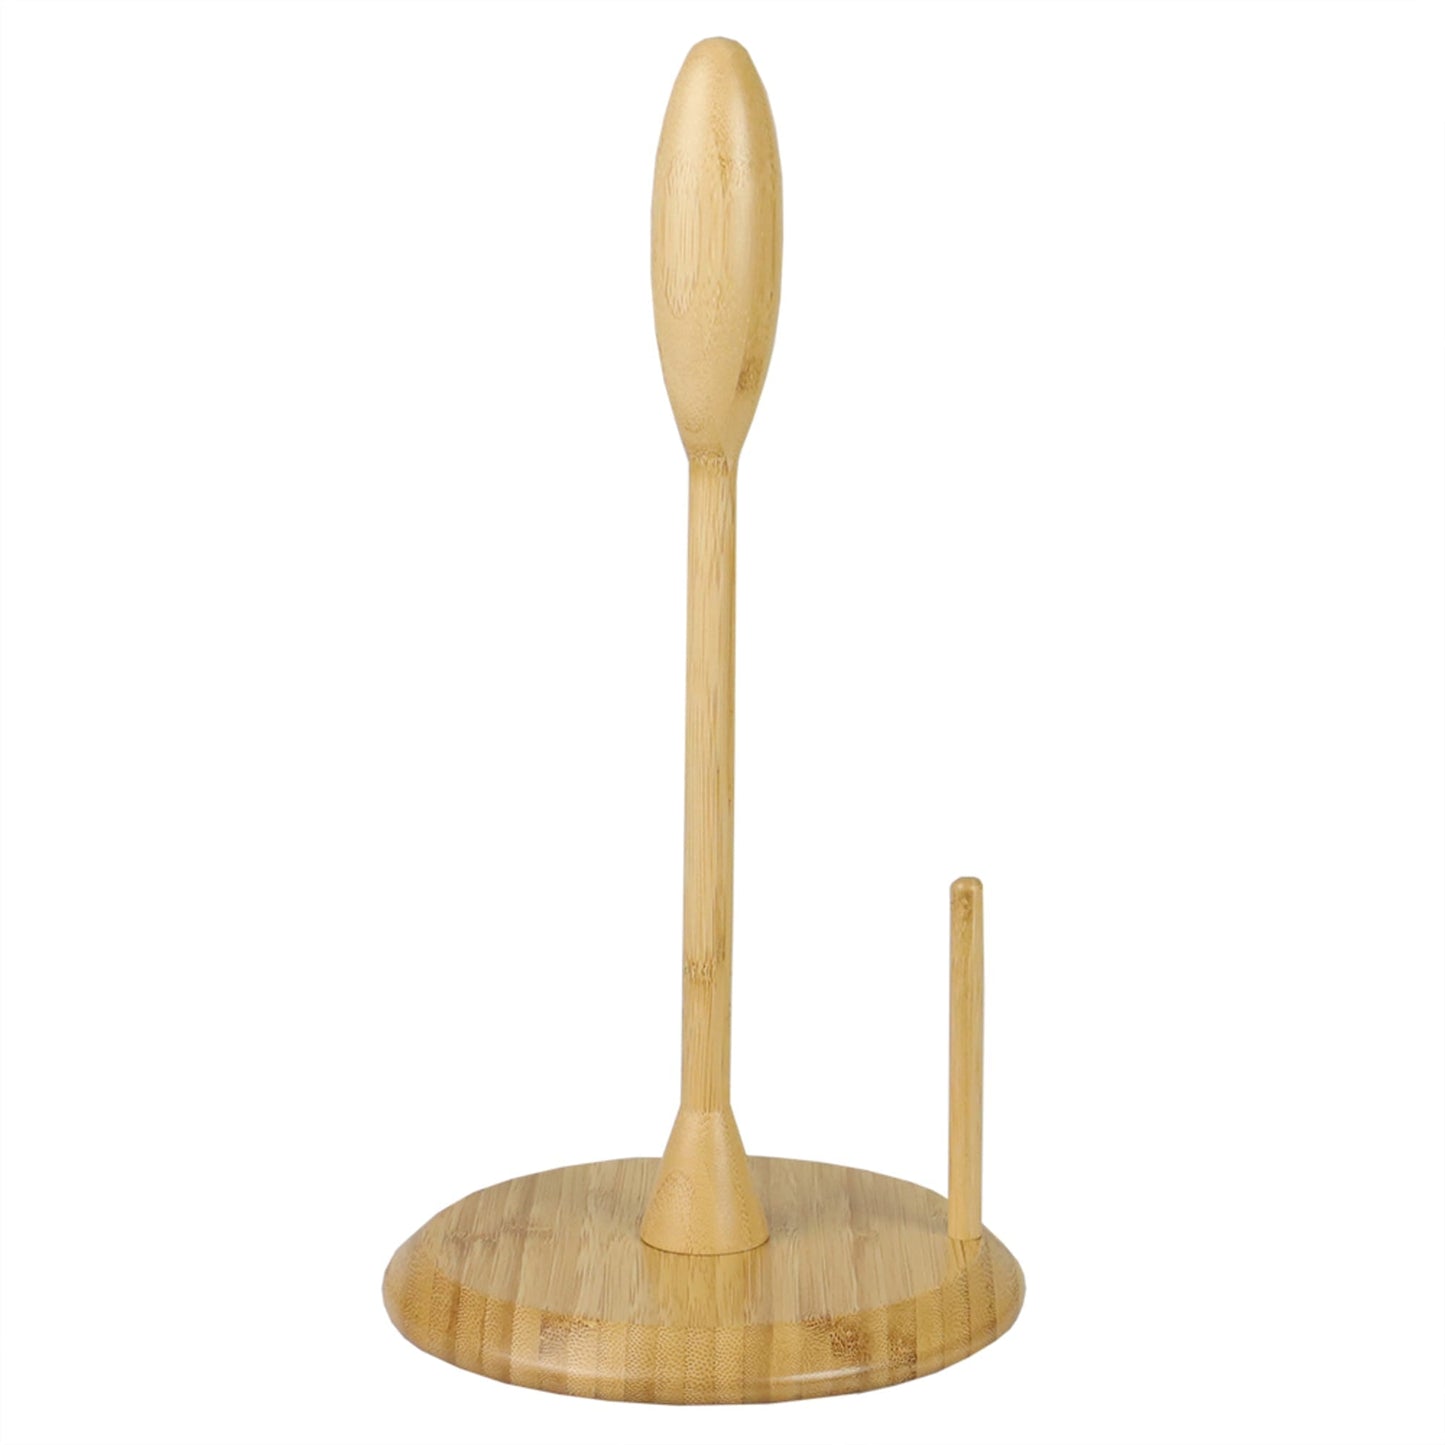 Michael Graves Design Freestanding Bamboo Paper Towel Holder with Side Bar, Natural